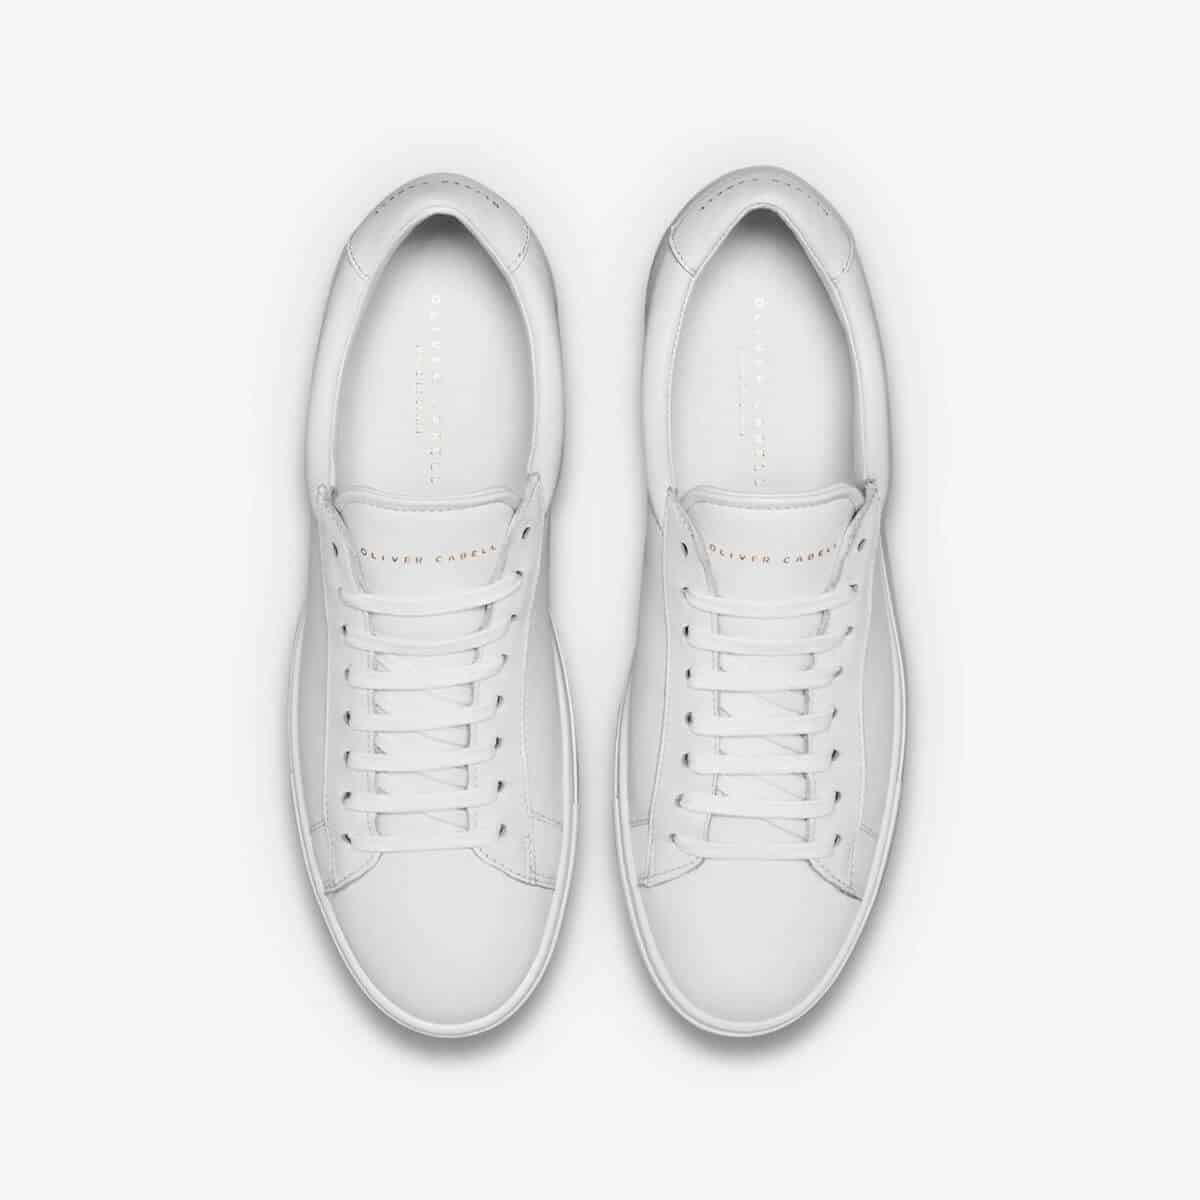 Top-down view of Oliver Cabell white sneakers.